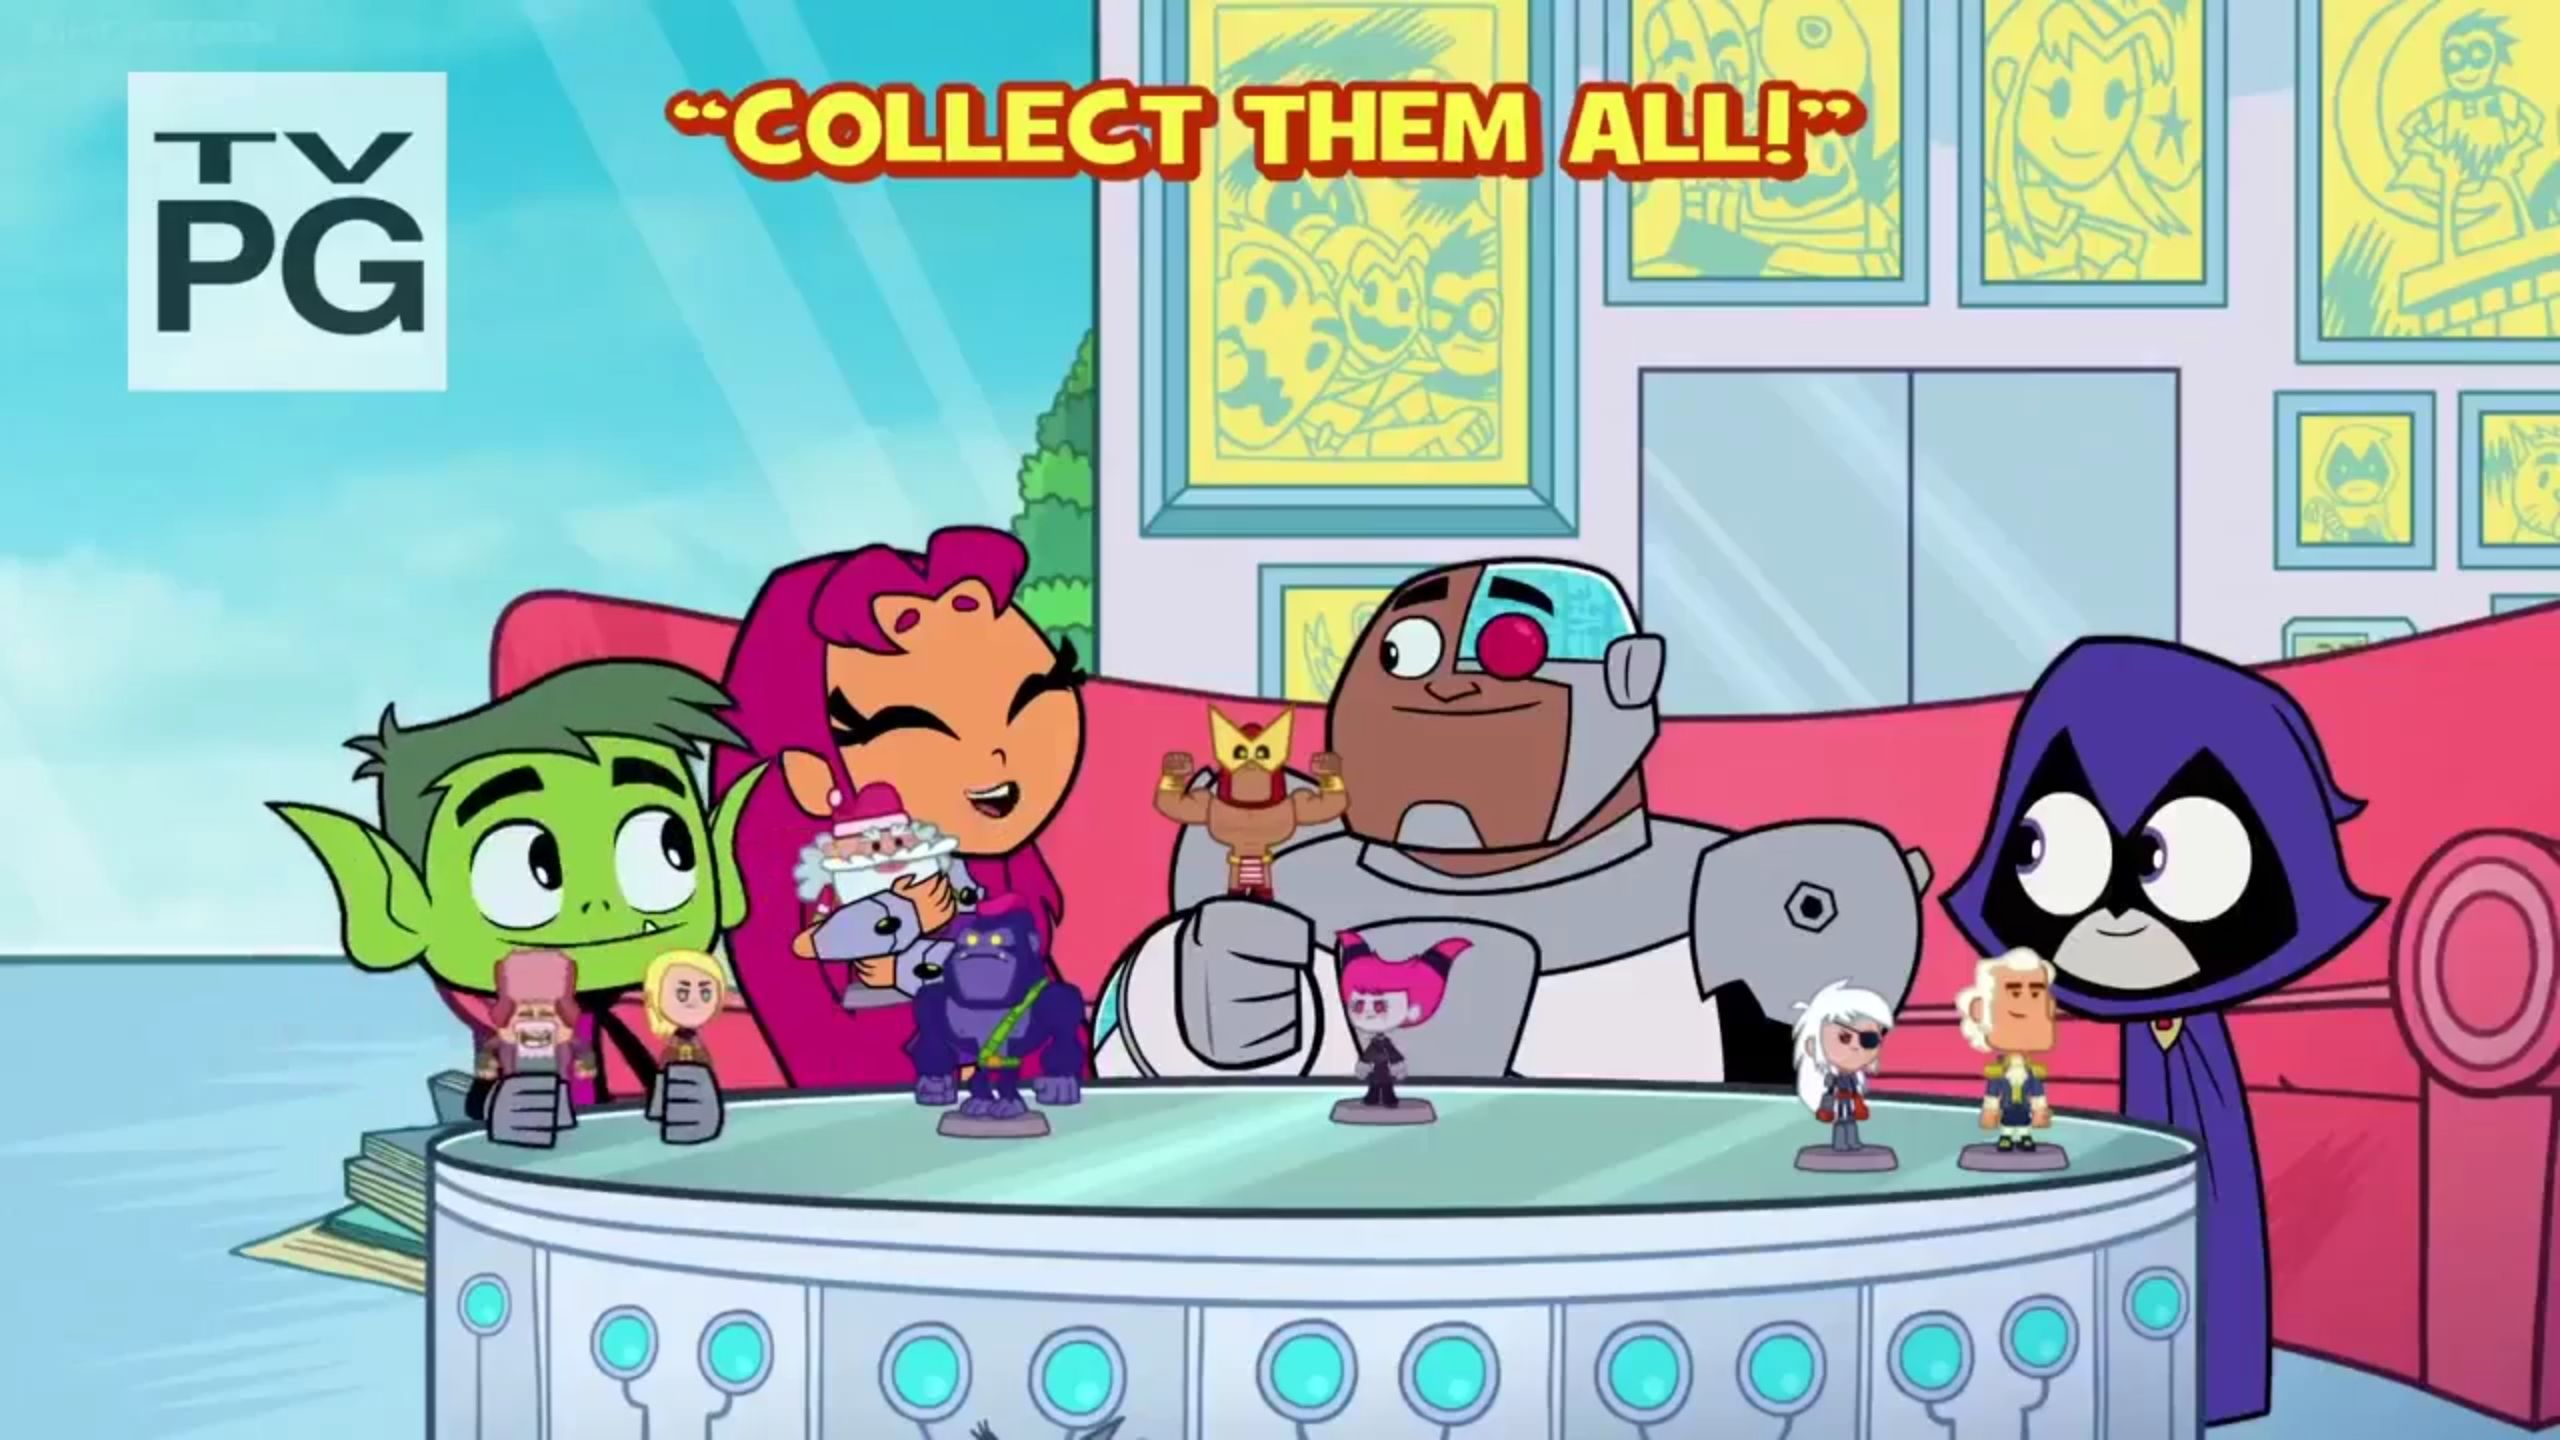 Collect Them All. Teen Titans Go!